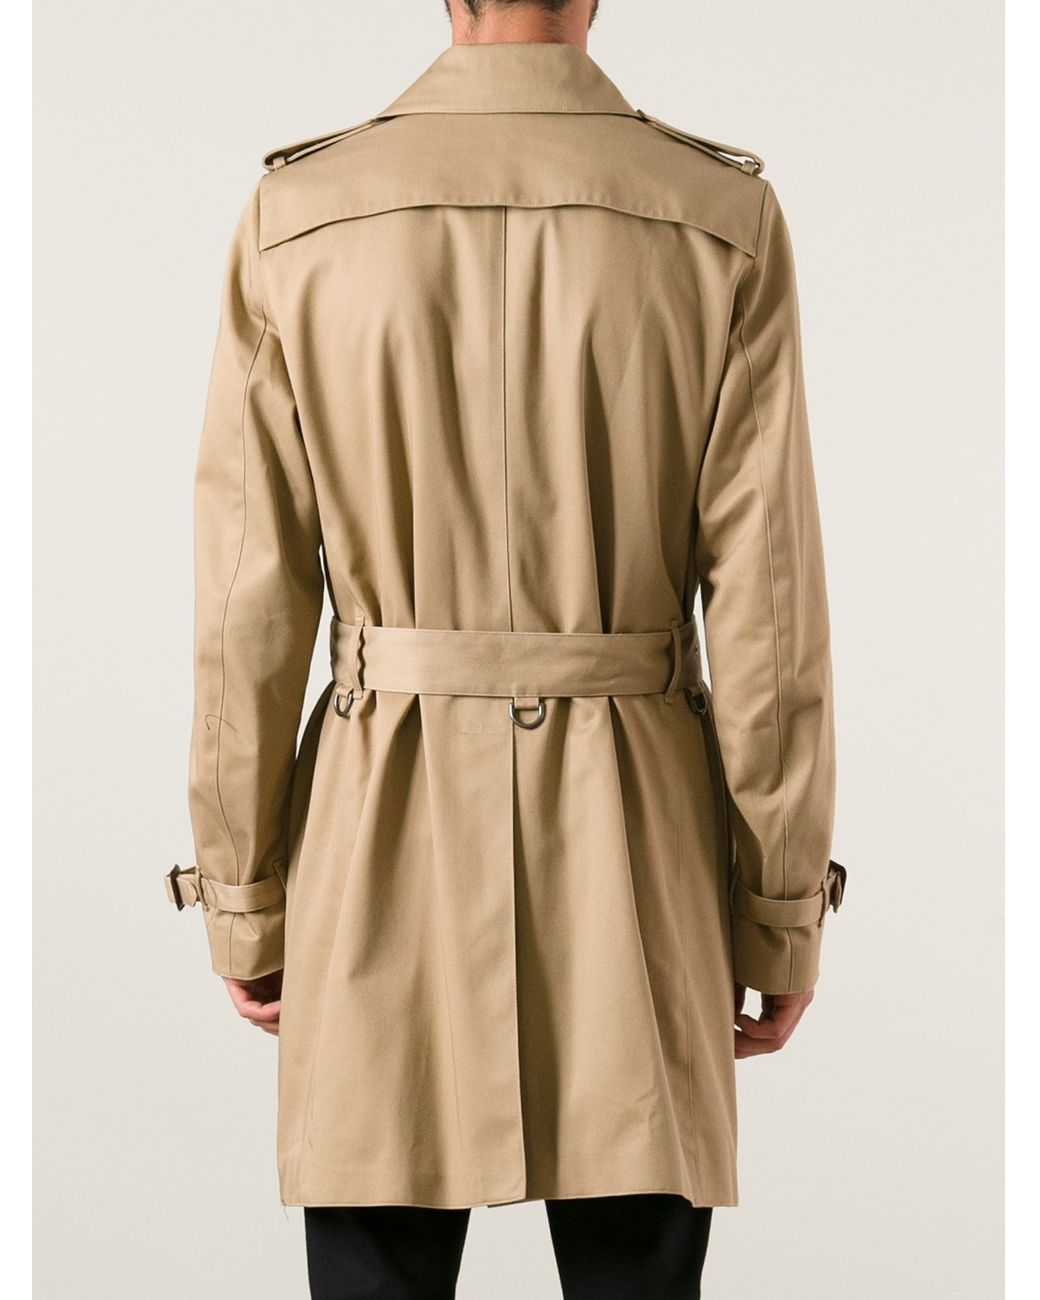 Paul Smith Paul Smith Trench Coat in Natural for Men | Lyst UK